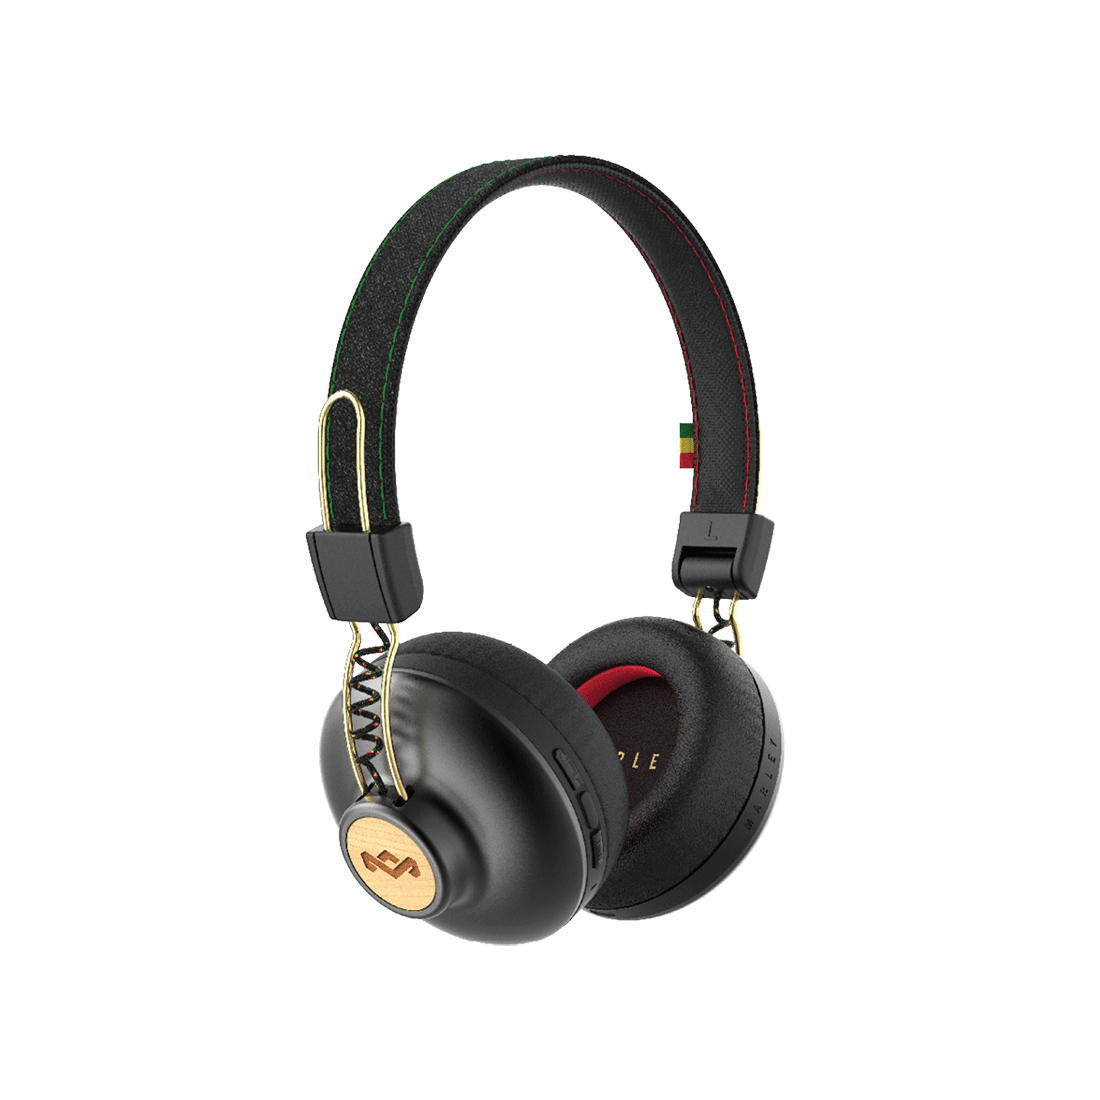 The House Of Marley Positive Vibration 2 Wireless